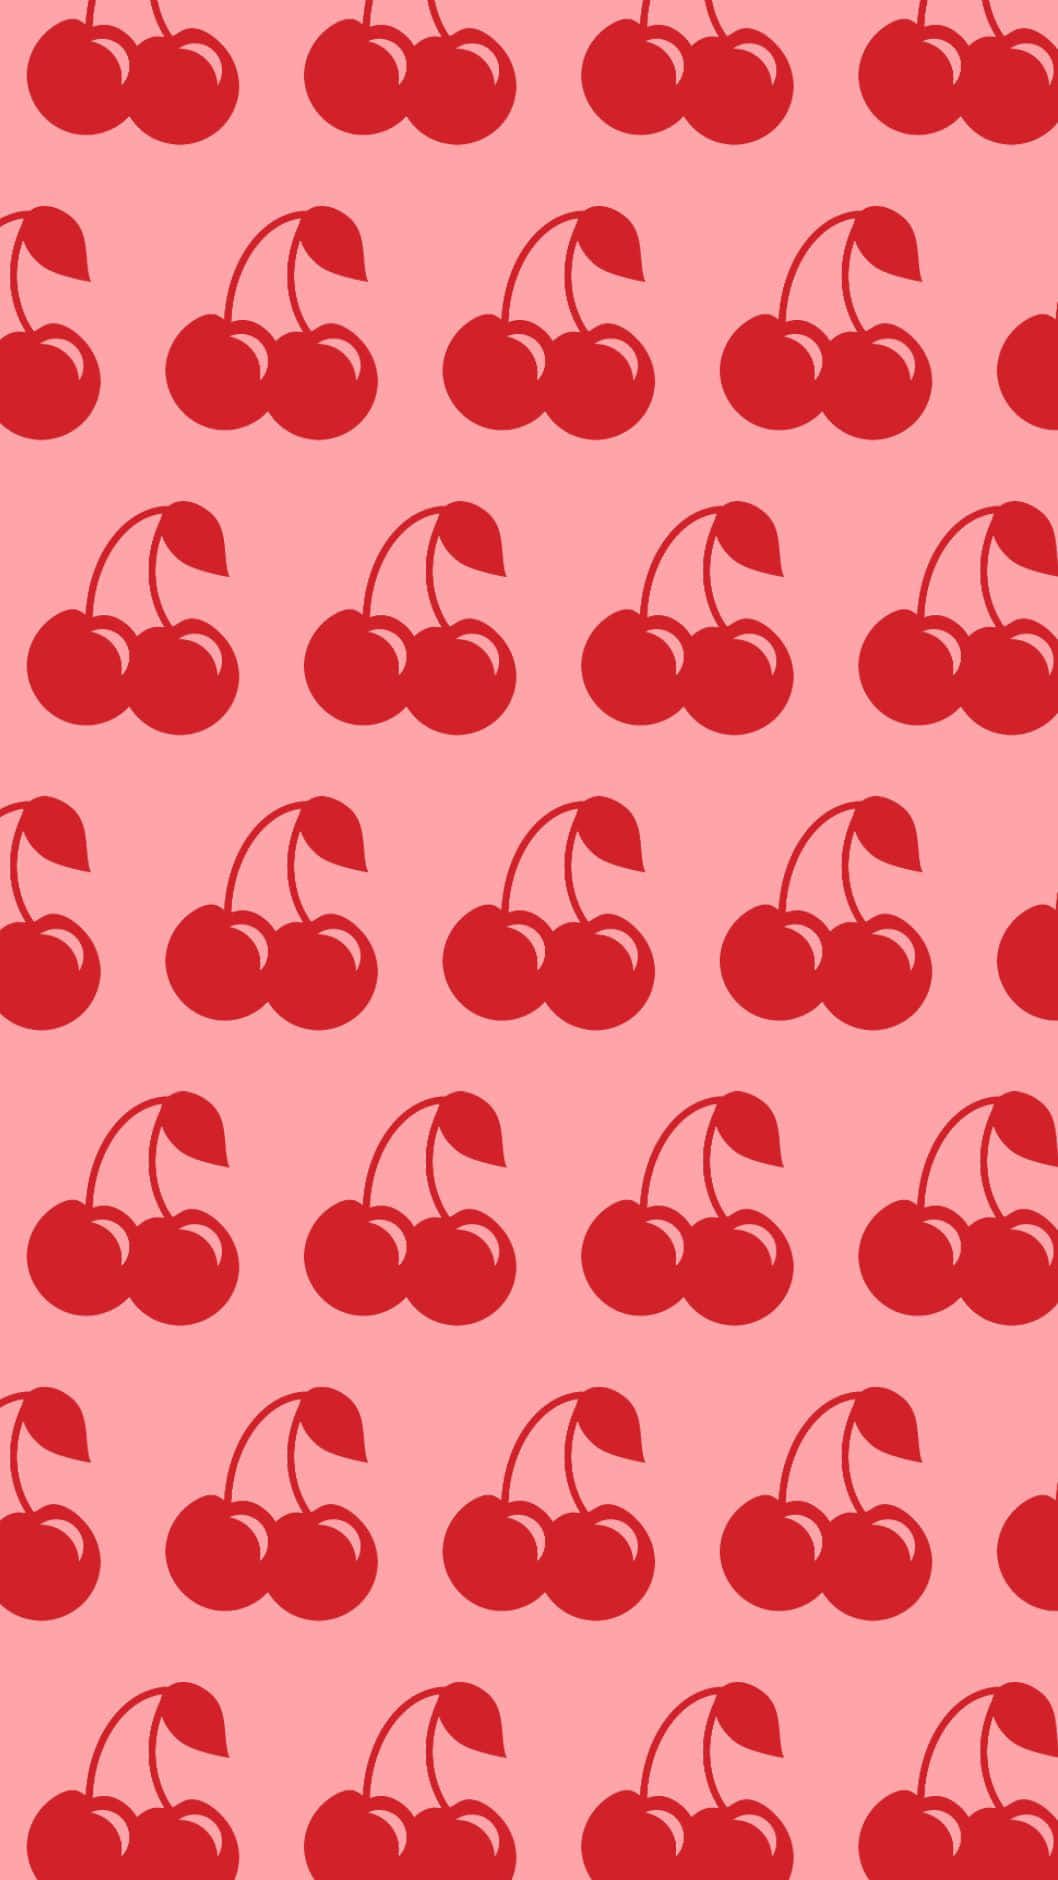 A pattern of red cherries on a pink background - Cherry